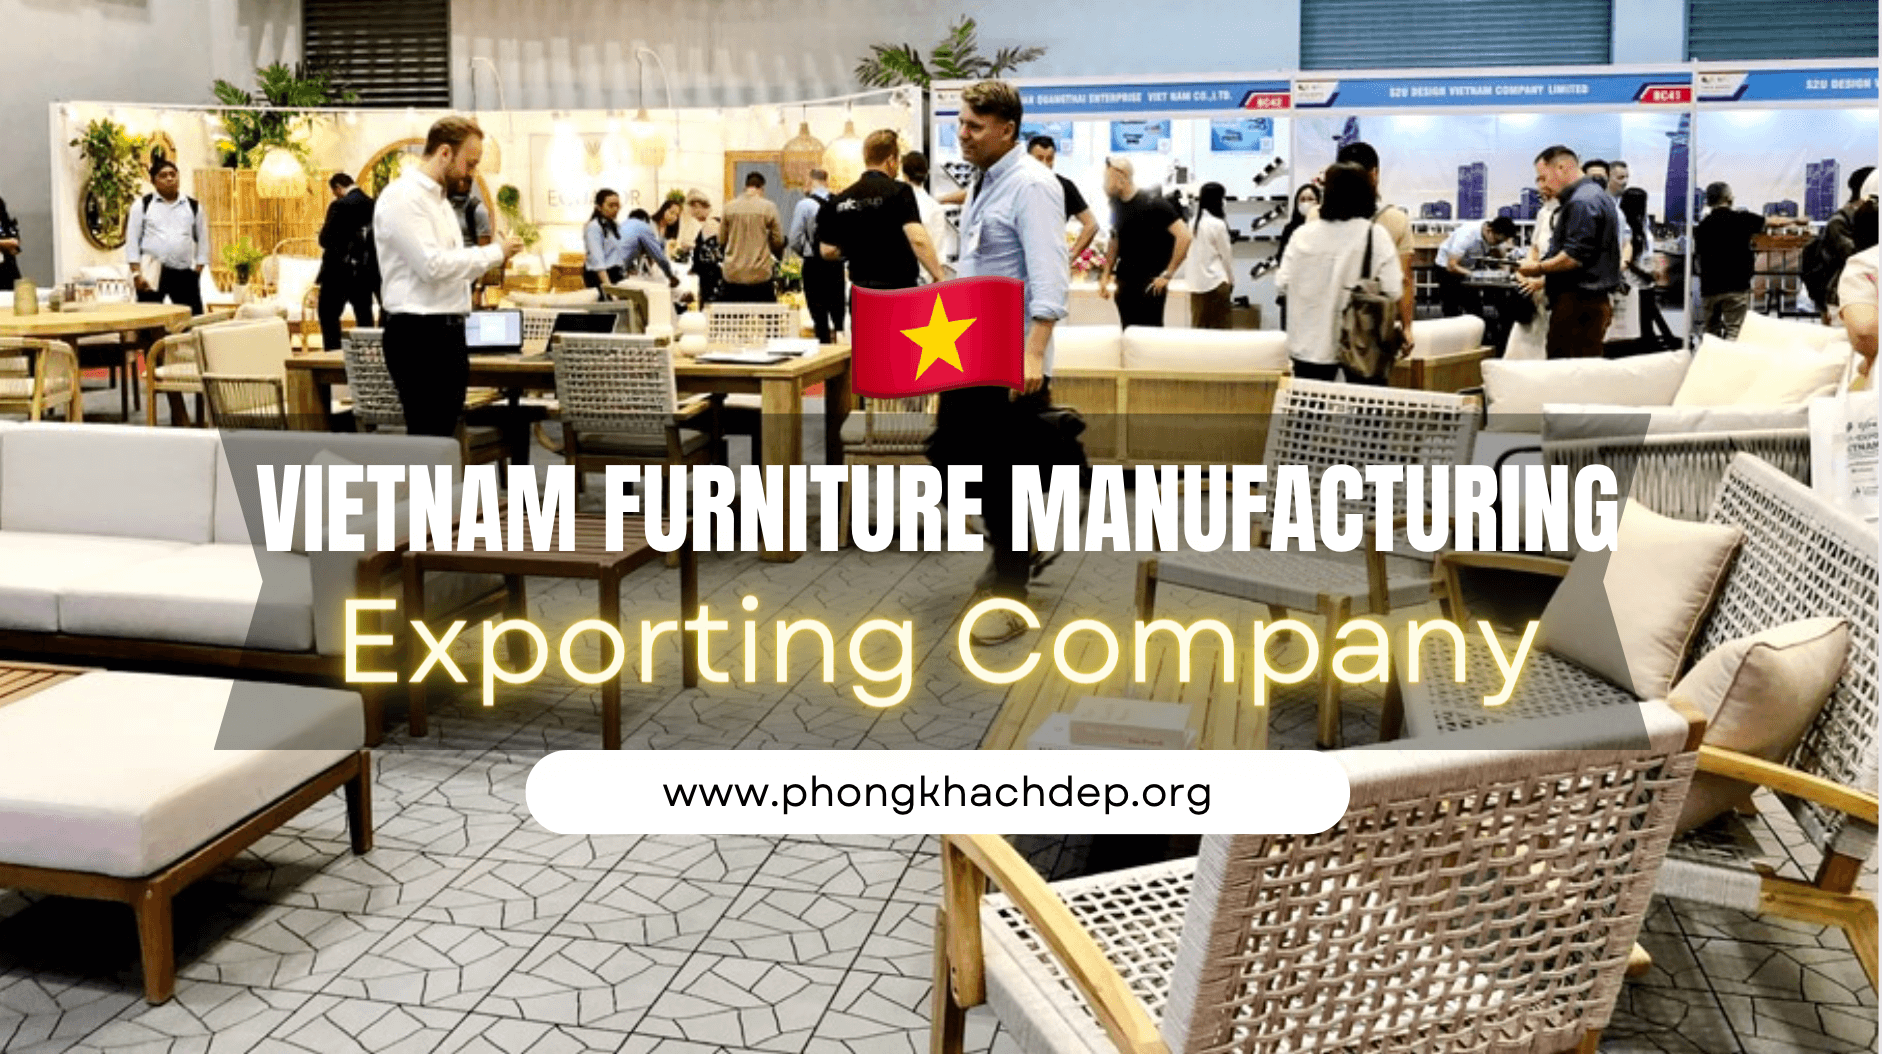 Furniture manufacturing and exporting company